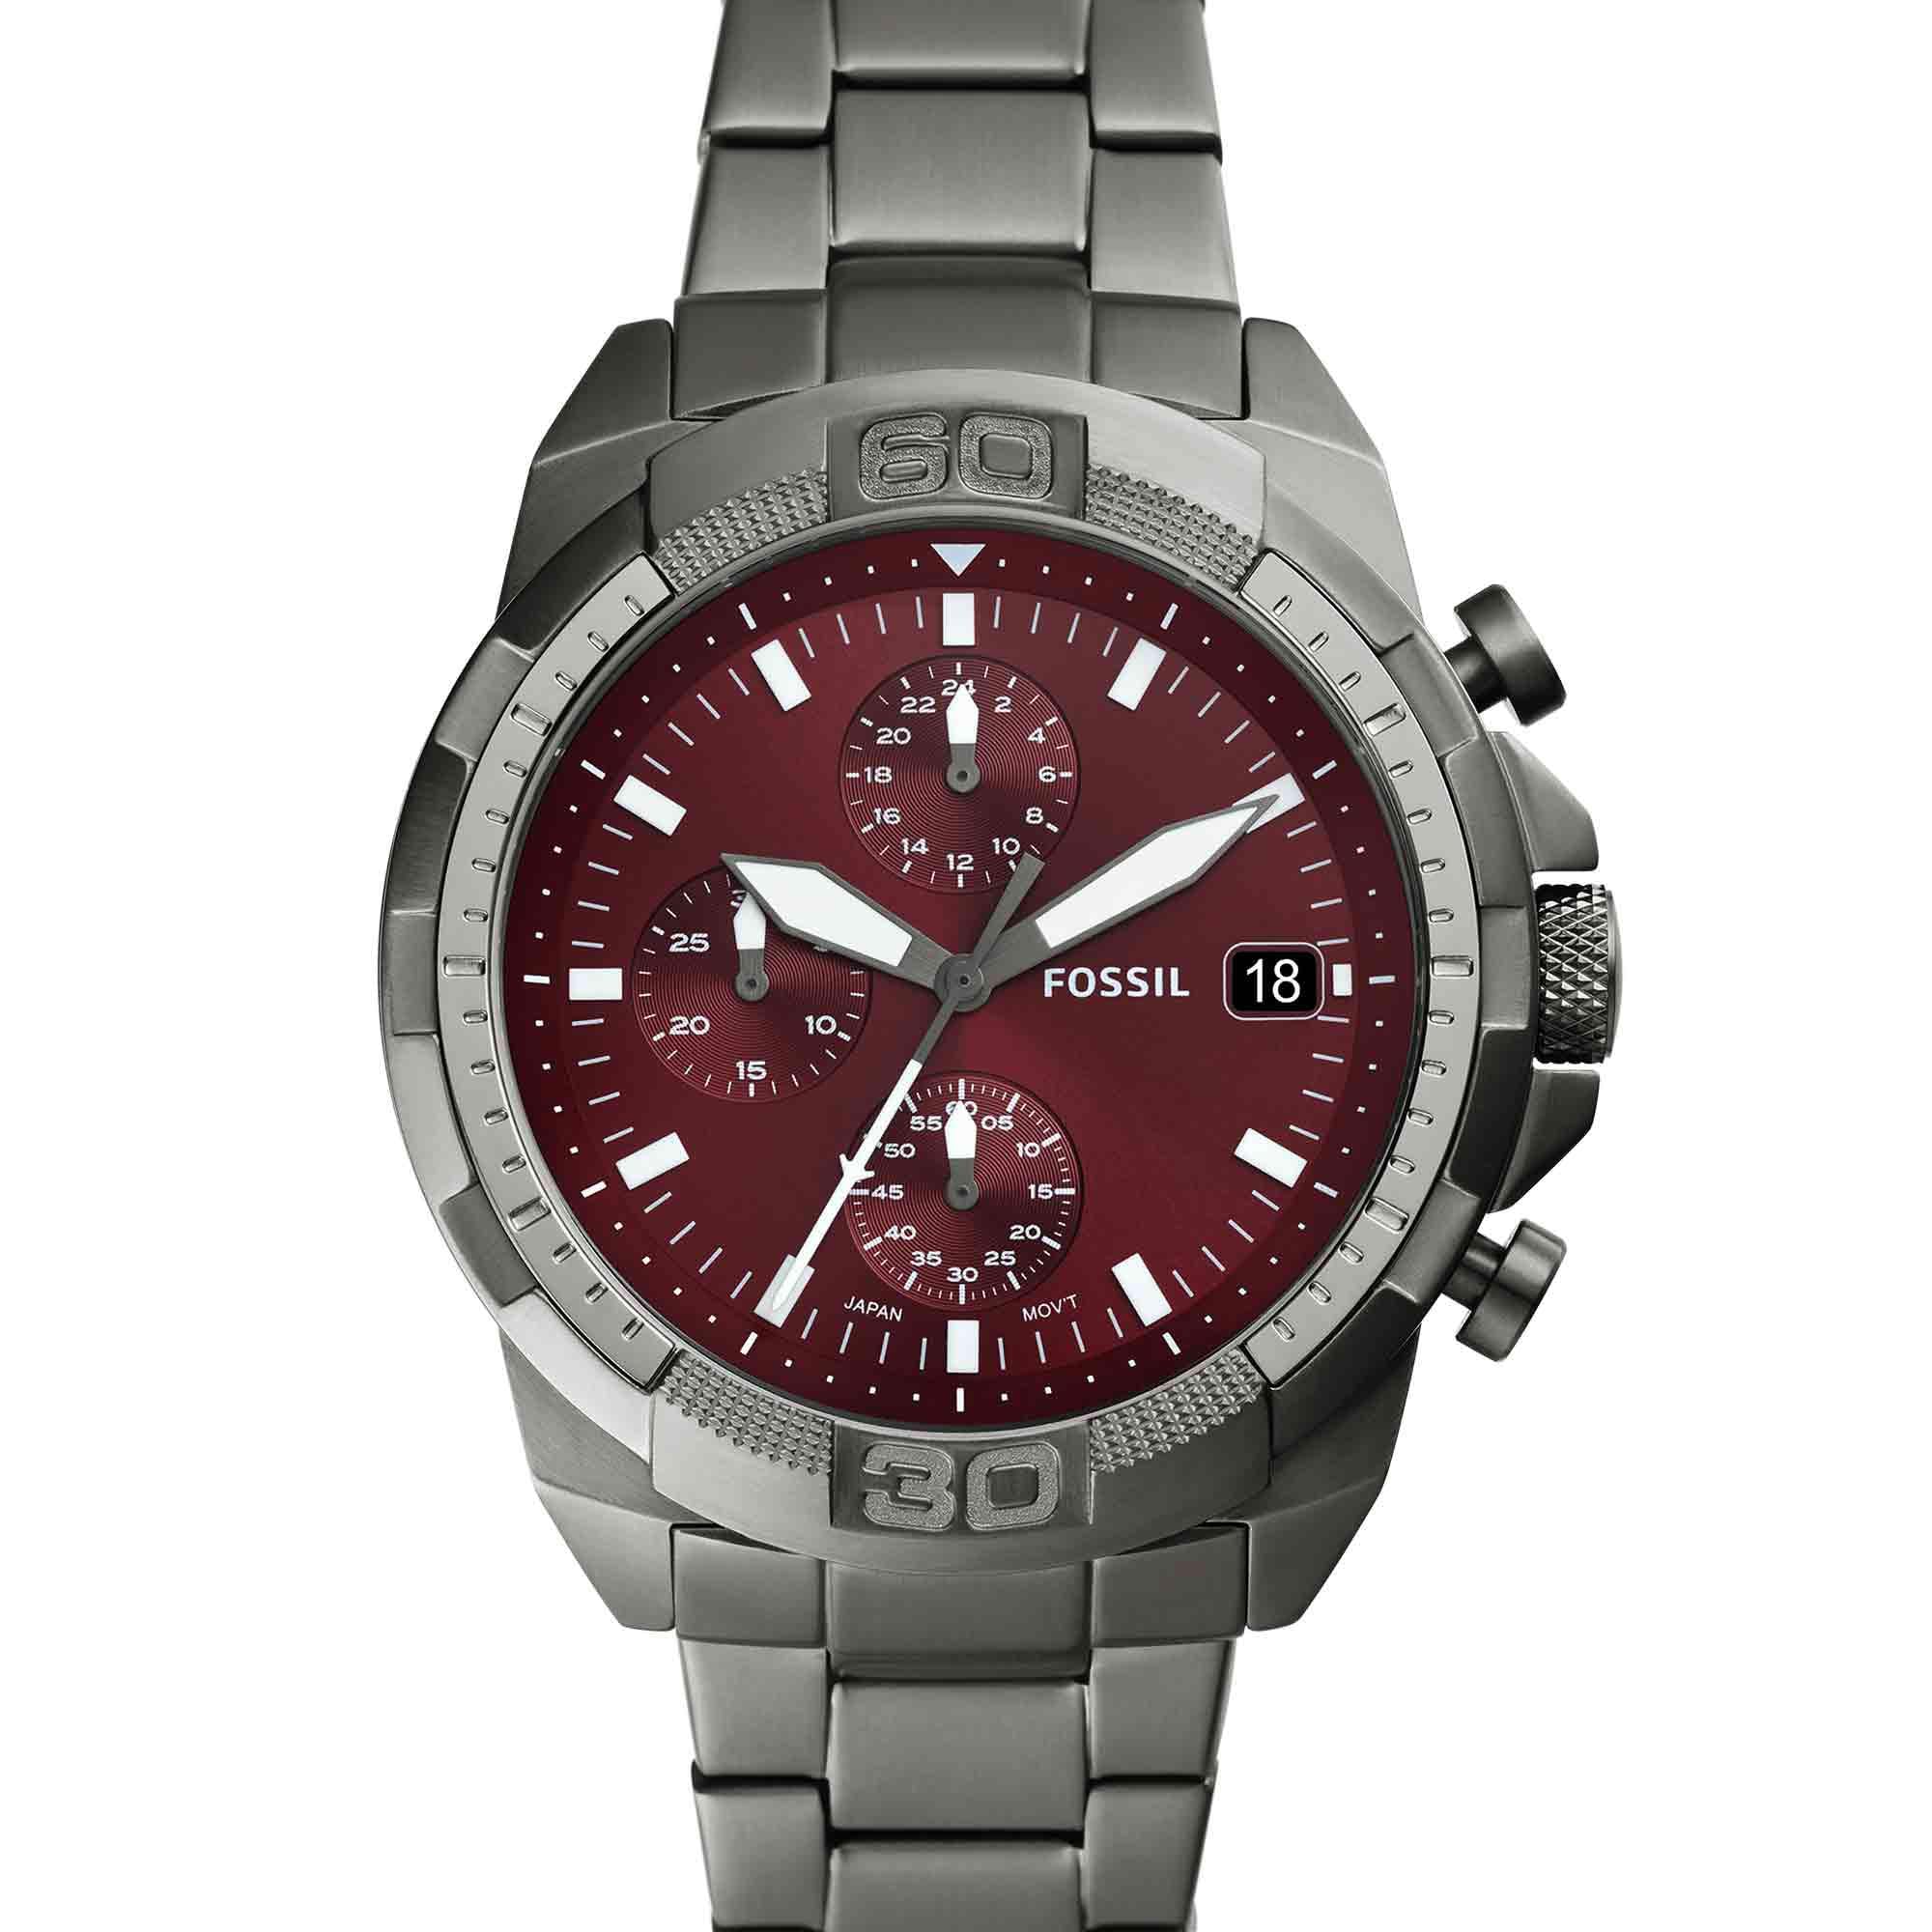 Fossil Bronson Men's Watch with Stainless Steel Bracelet or Genuine Leather Band, Chronograph or Three-Hand Analog Display